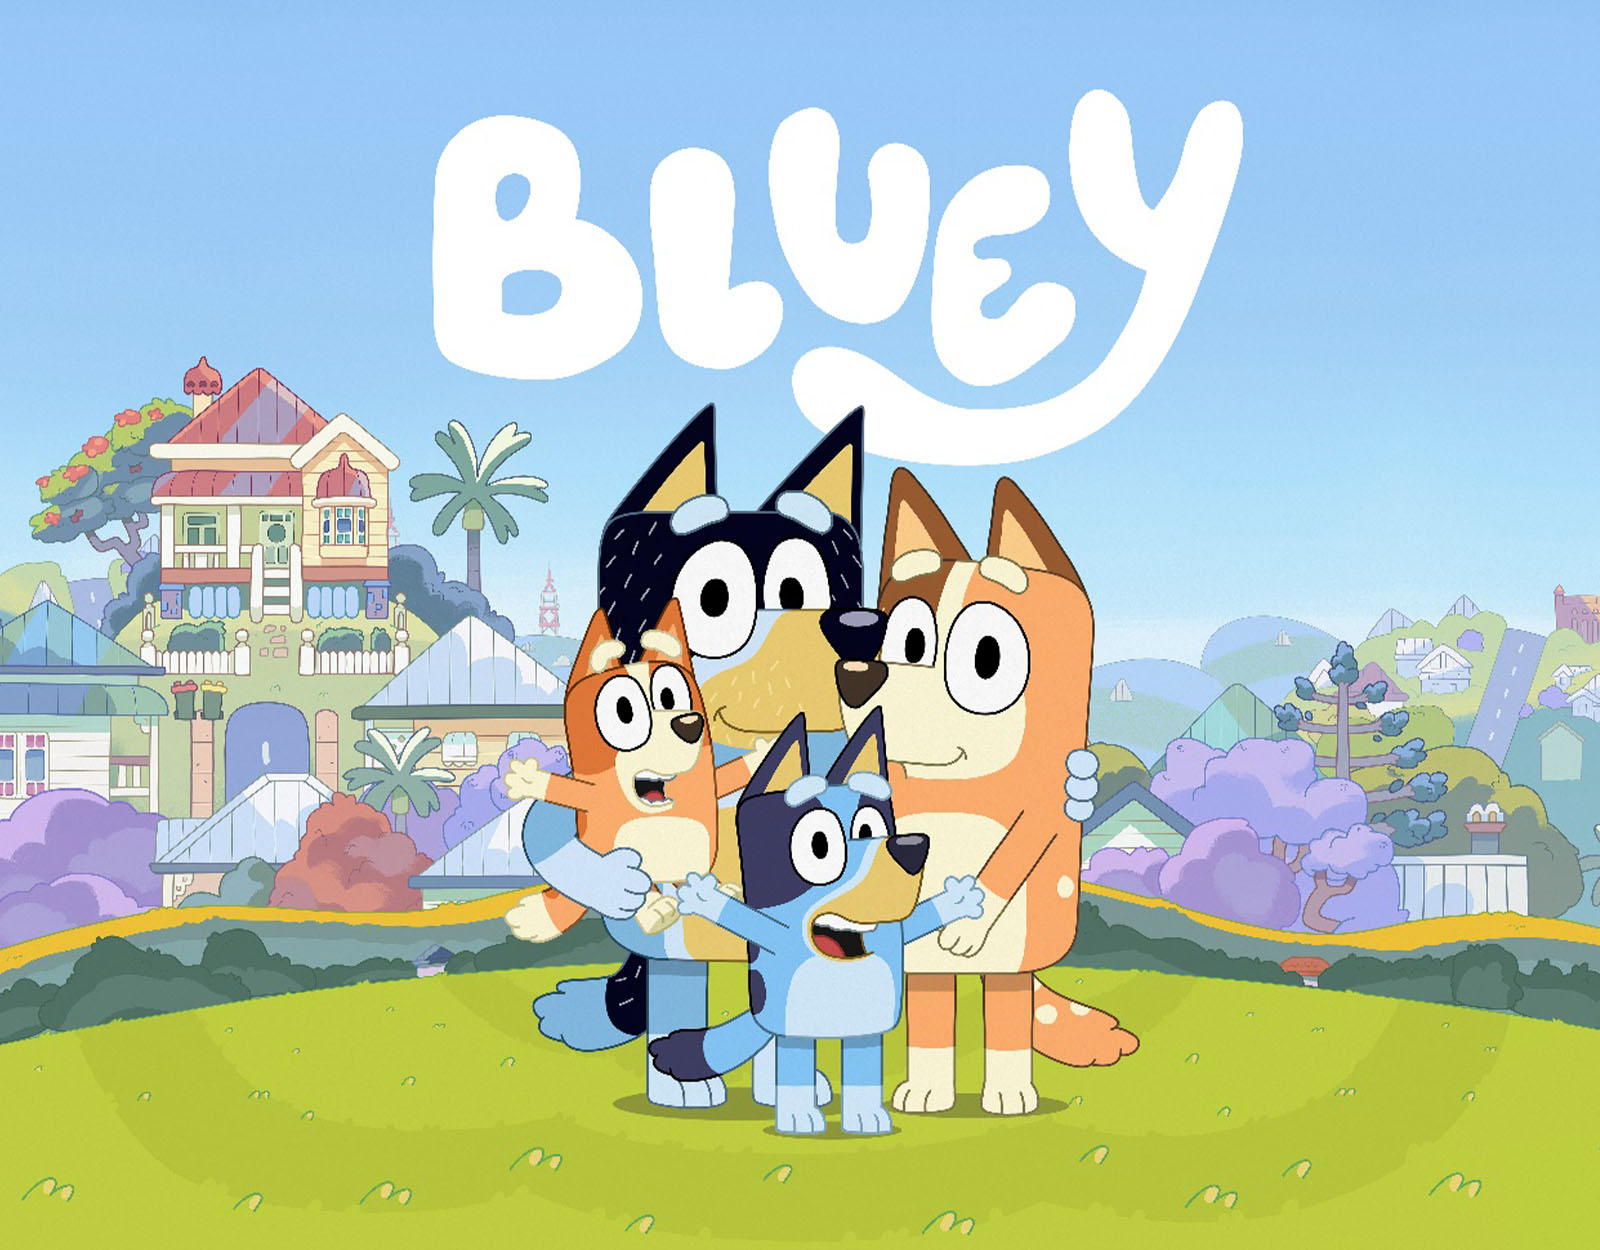 Bluey Will Soon Make Its Way to Local TV!